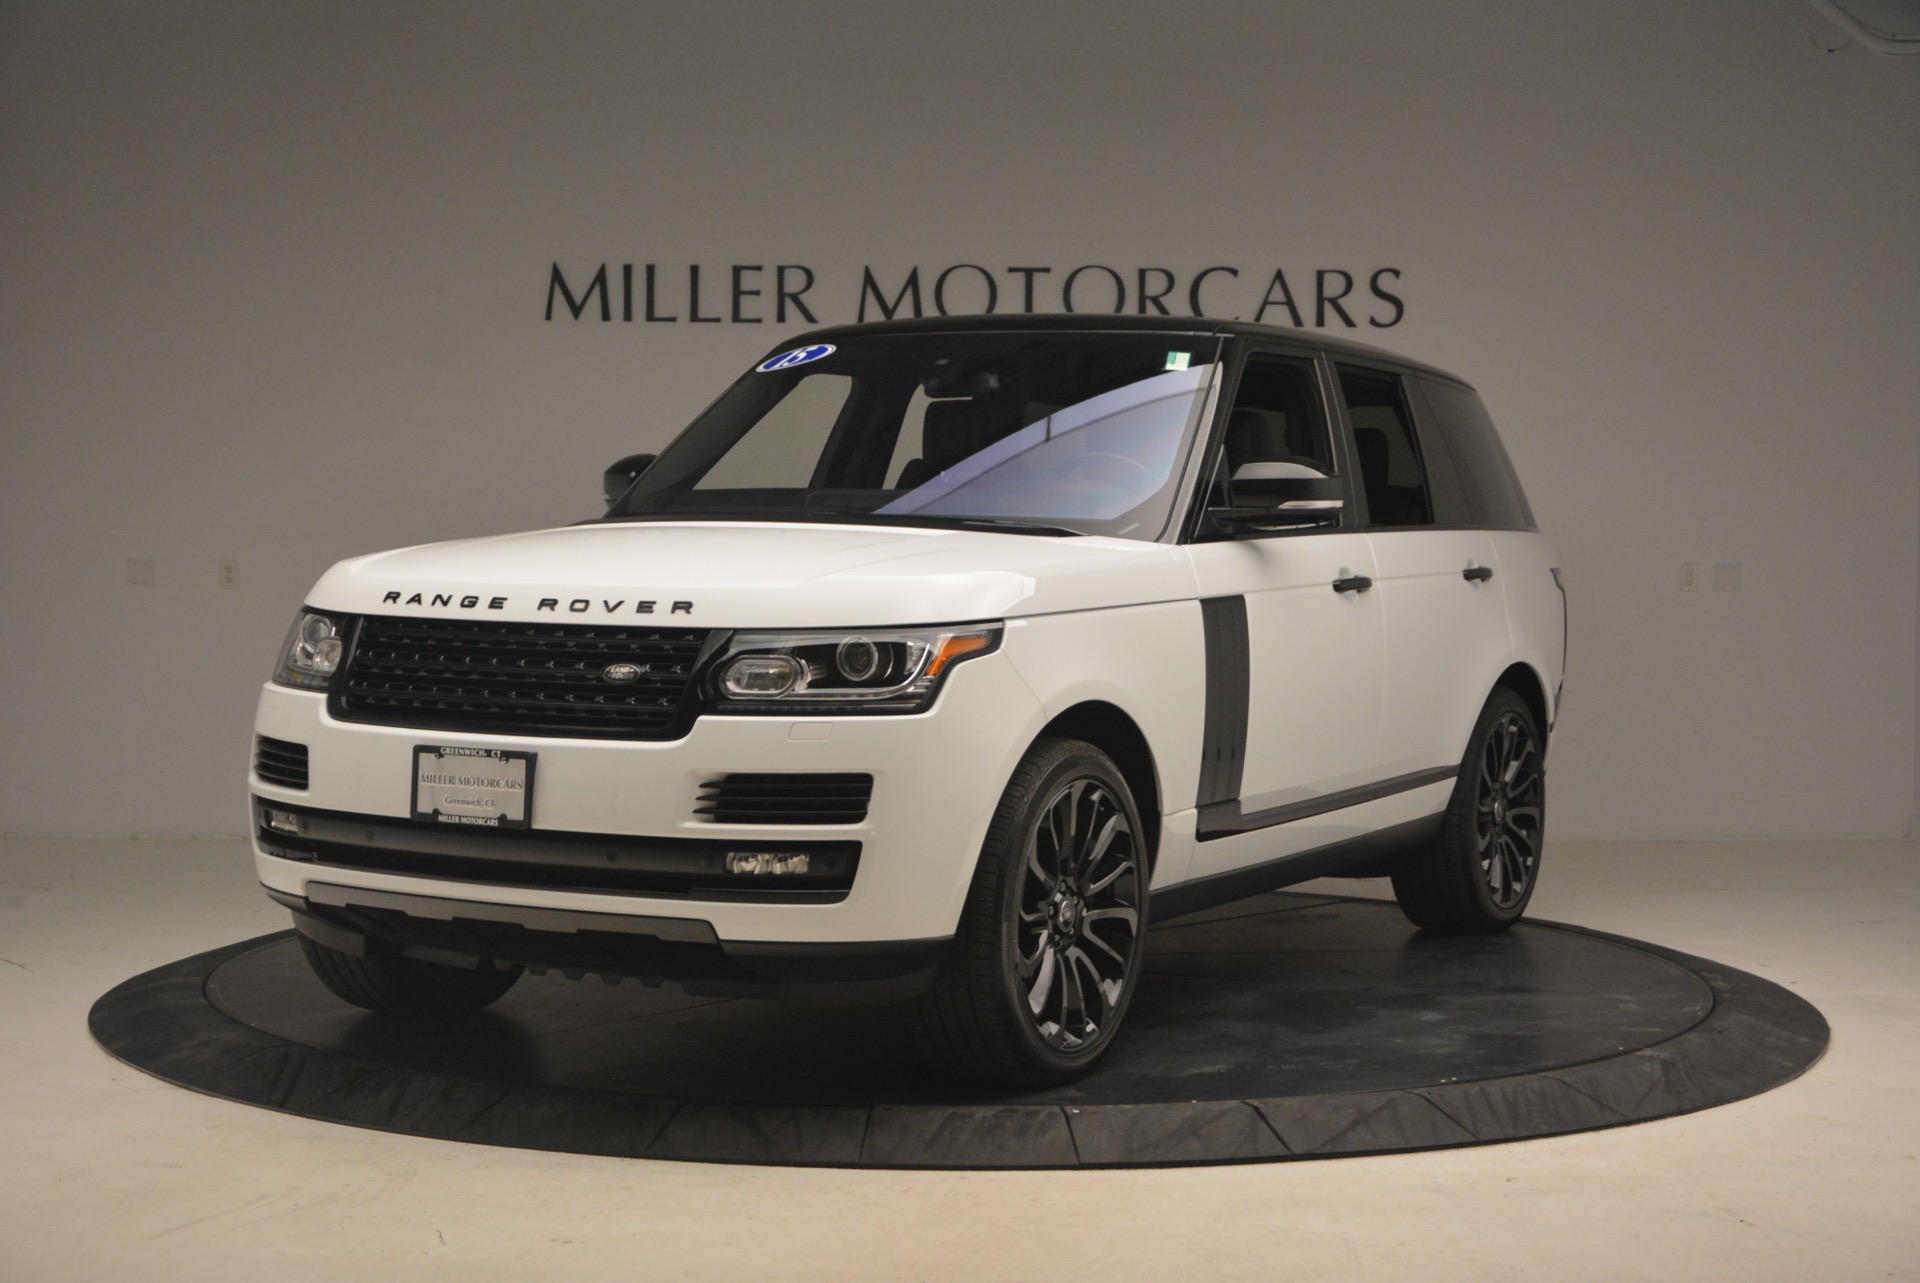 Used 2015 Land Rover Range Rover Supercharged for sale Sold at Aston Martin of Greenwich in Greenwich CT 06830 1